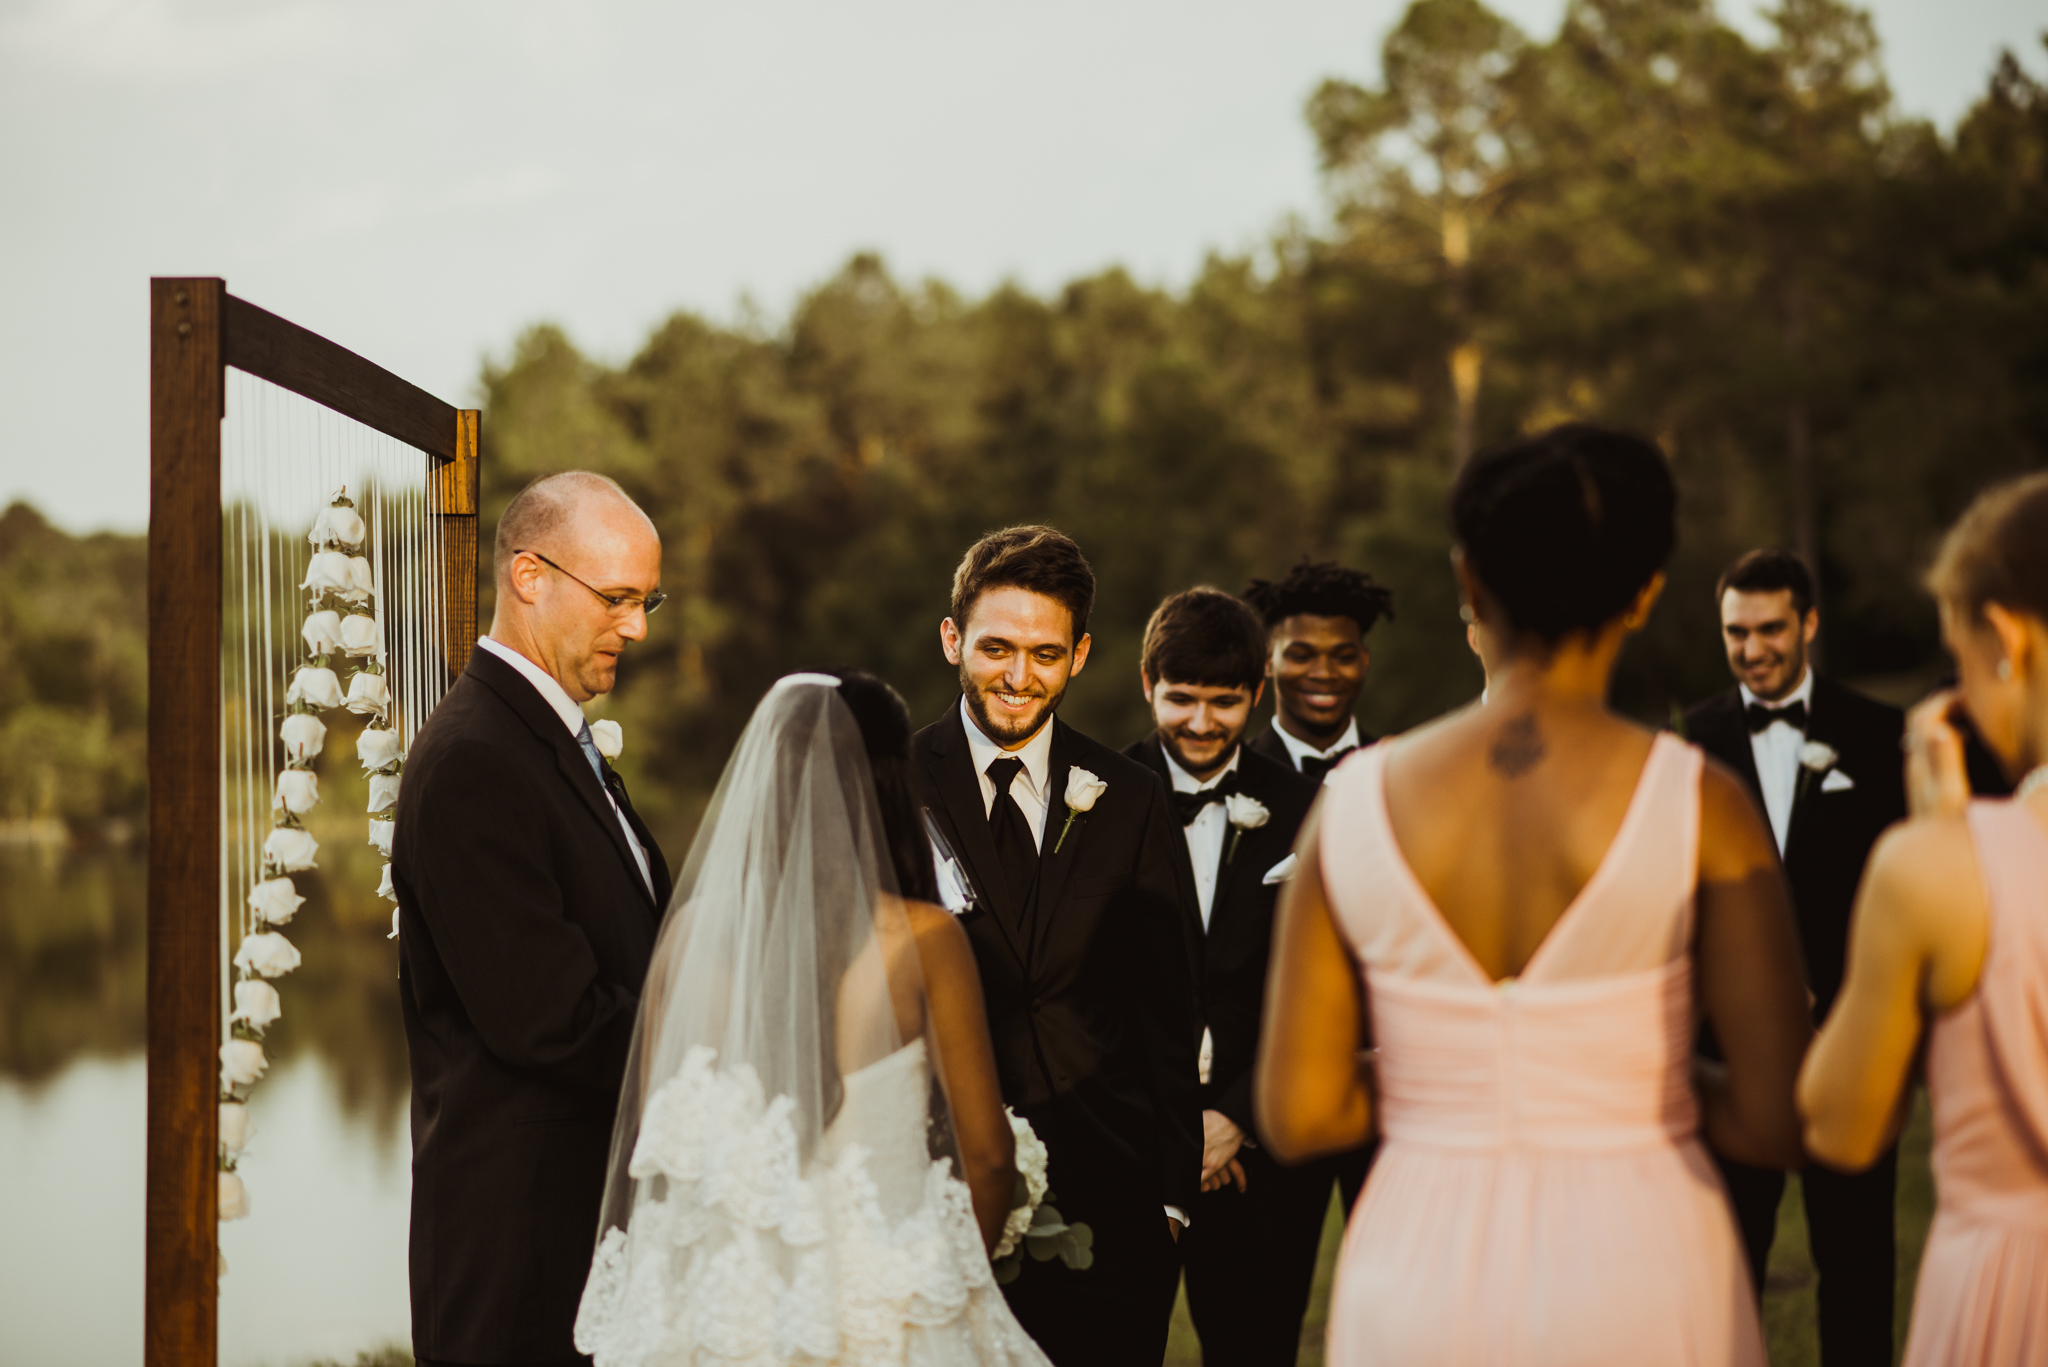 ©Isaiah & Taylor Photography - Lakeside Barn Wedding, Private Estate, Poplarville Mississippi-70.jpg